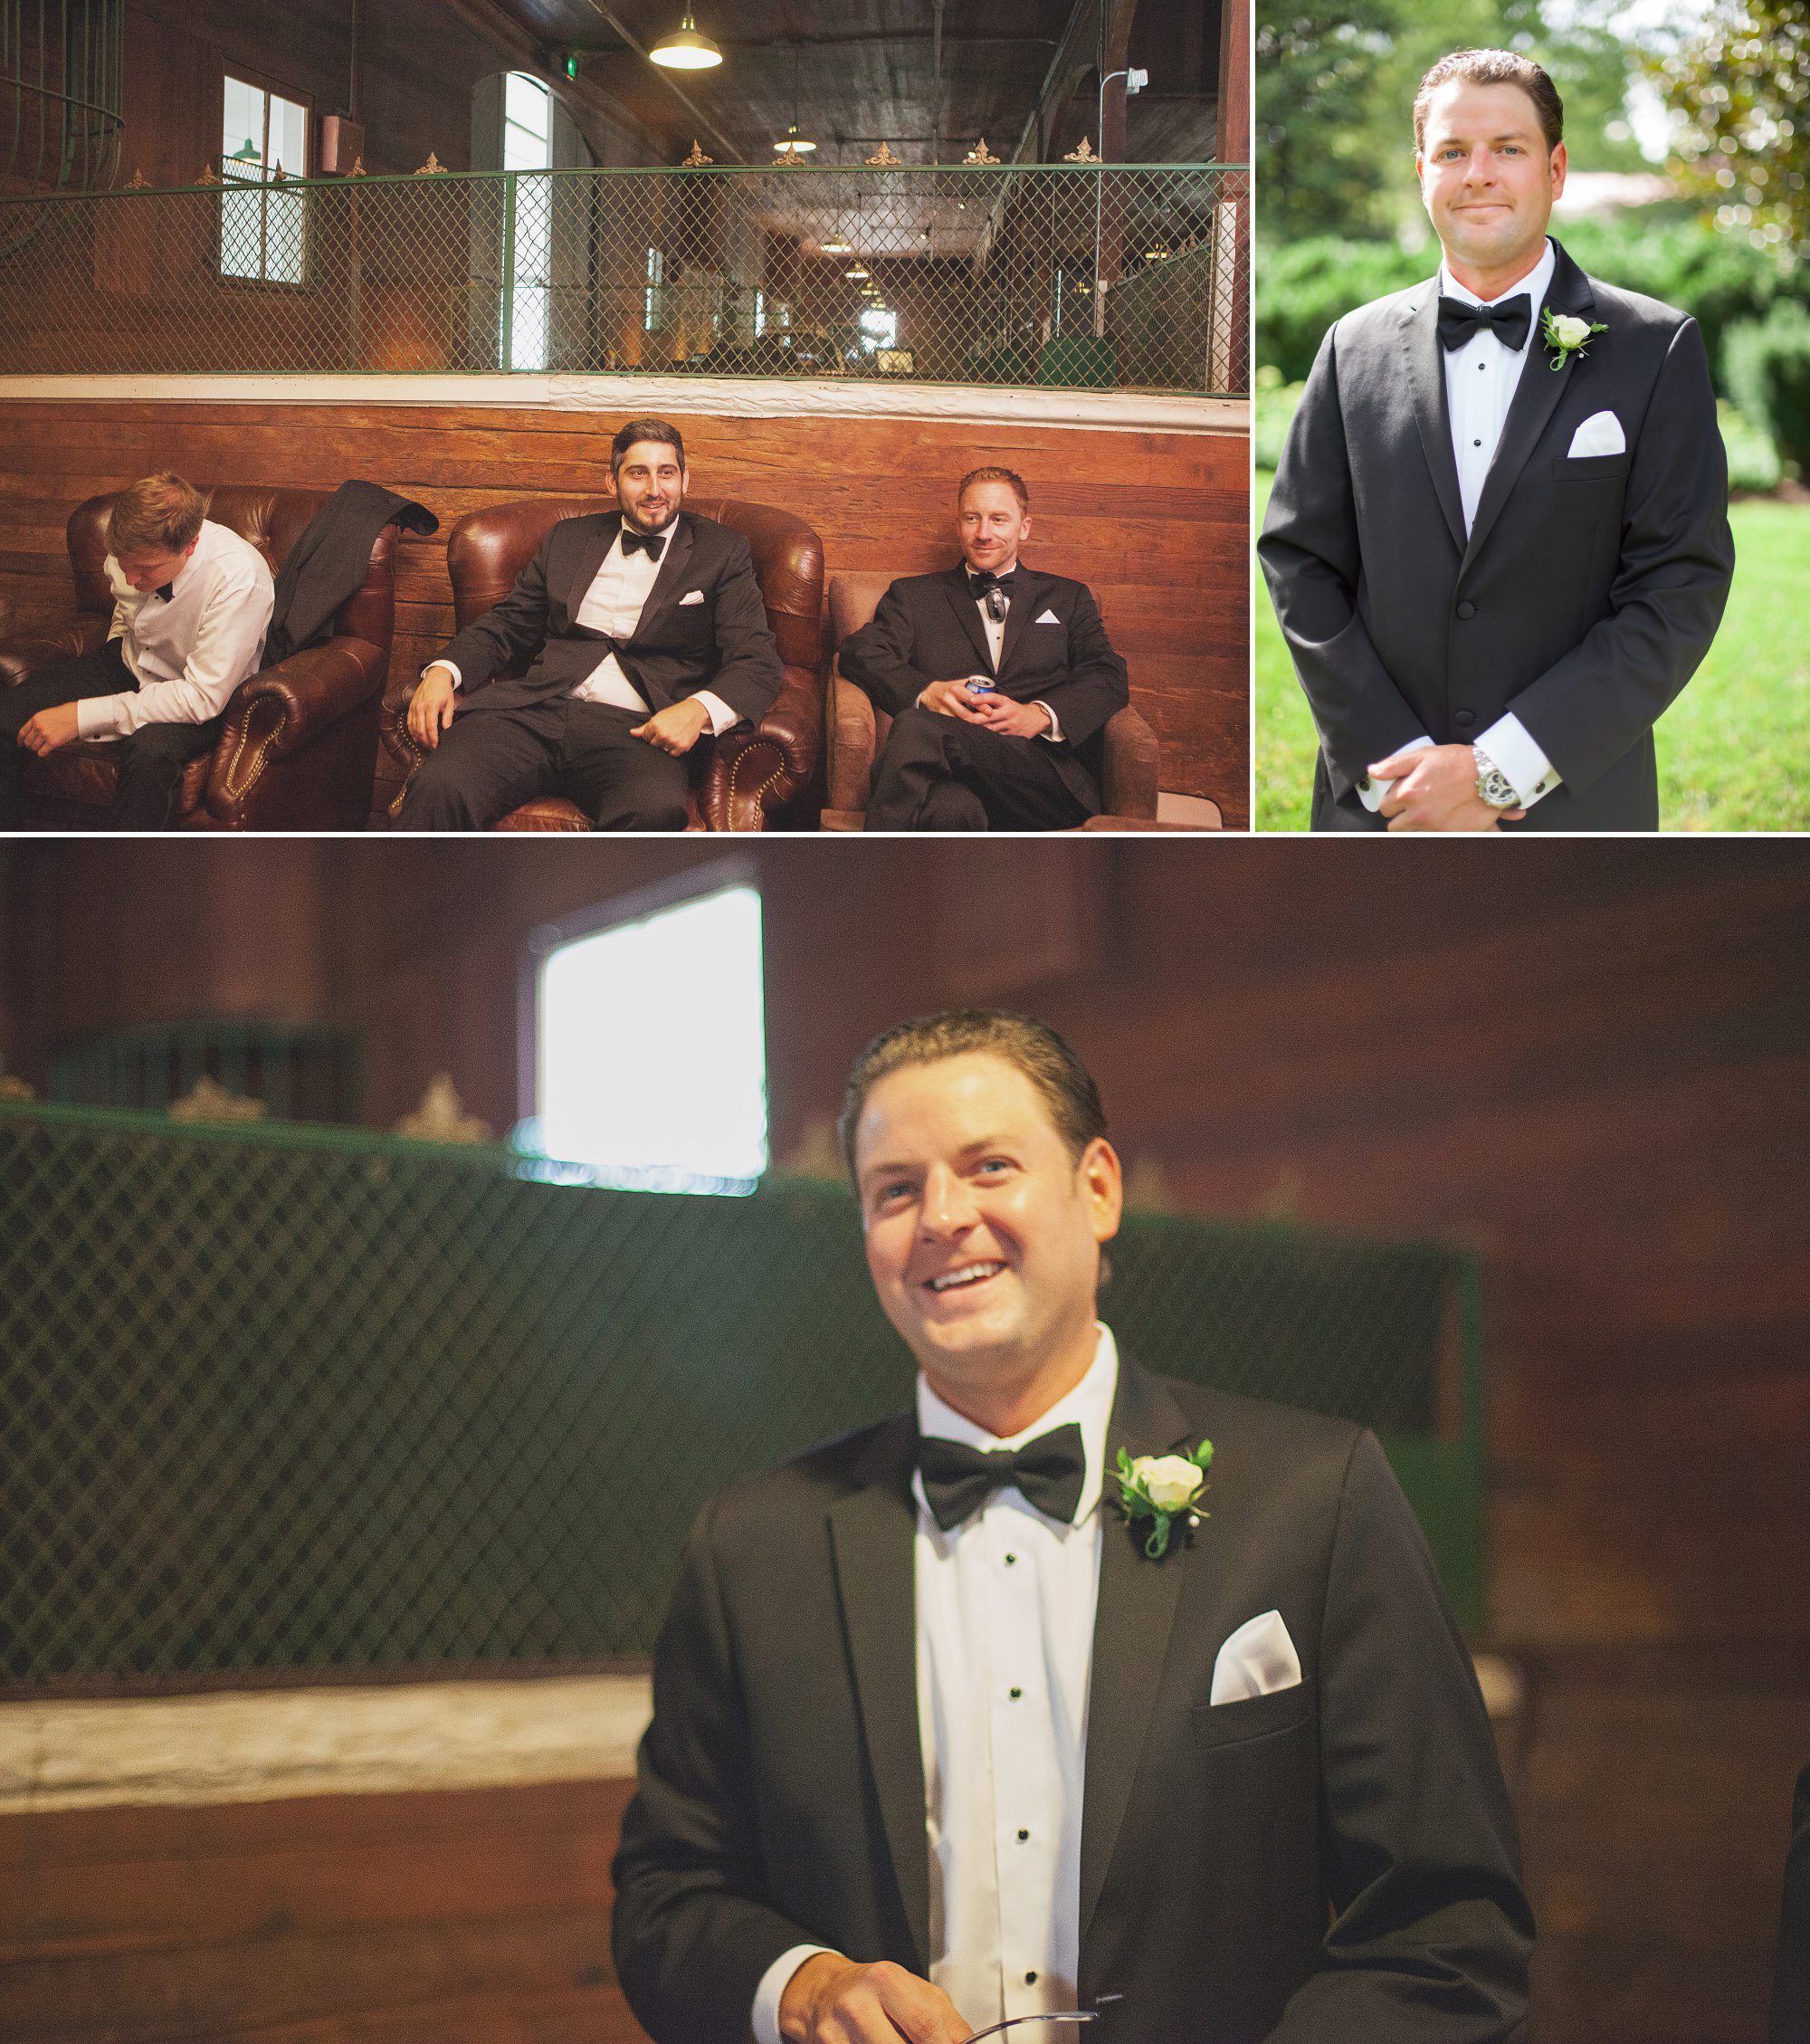 Groomsmen hang out and get ready before wedding ceremony and reception at Belle Meade Plantation in Nashville, TN. Photos by Krista Lee Photography 